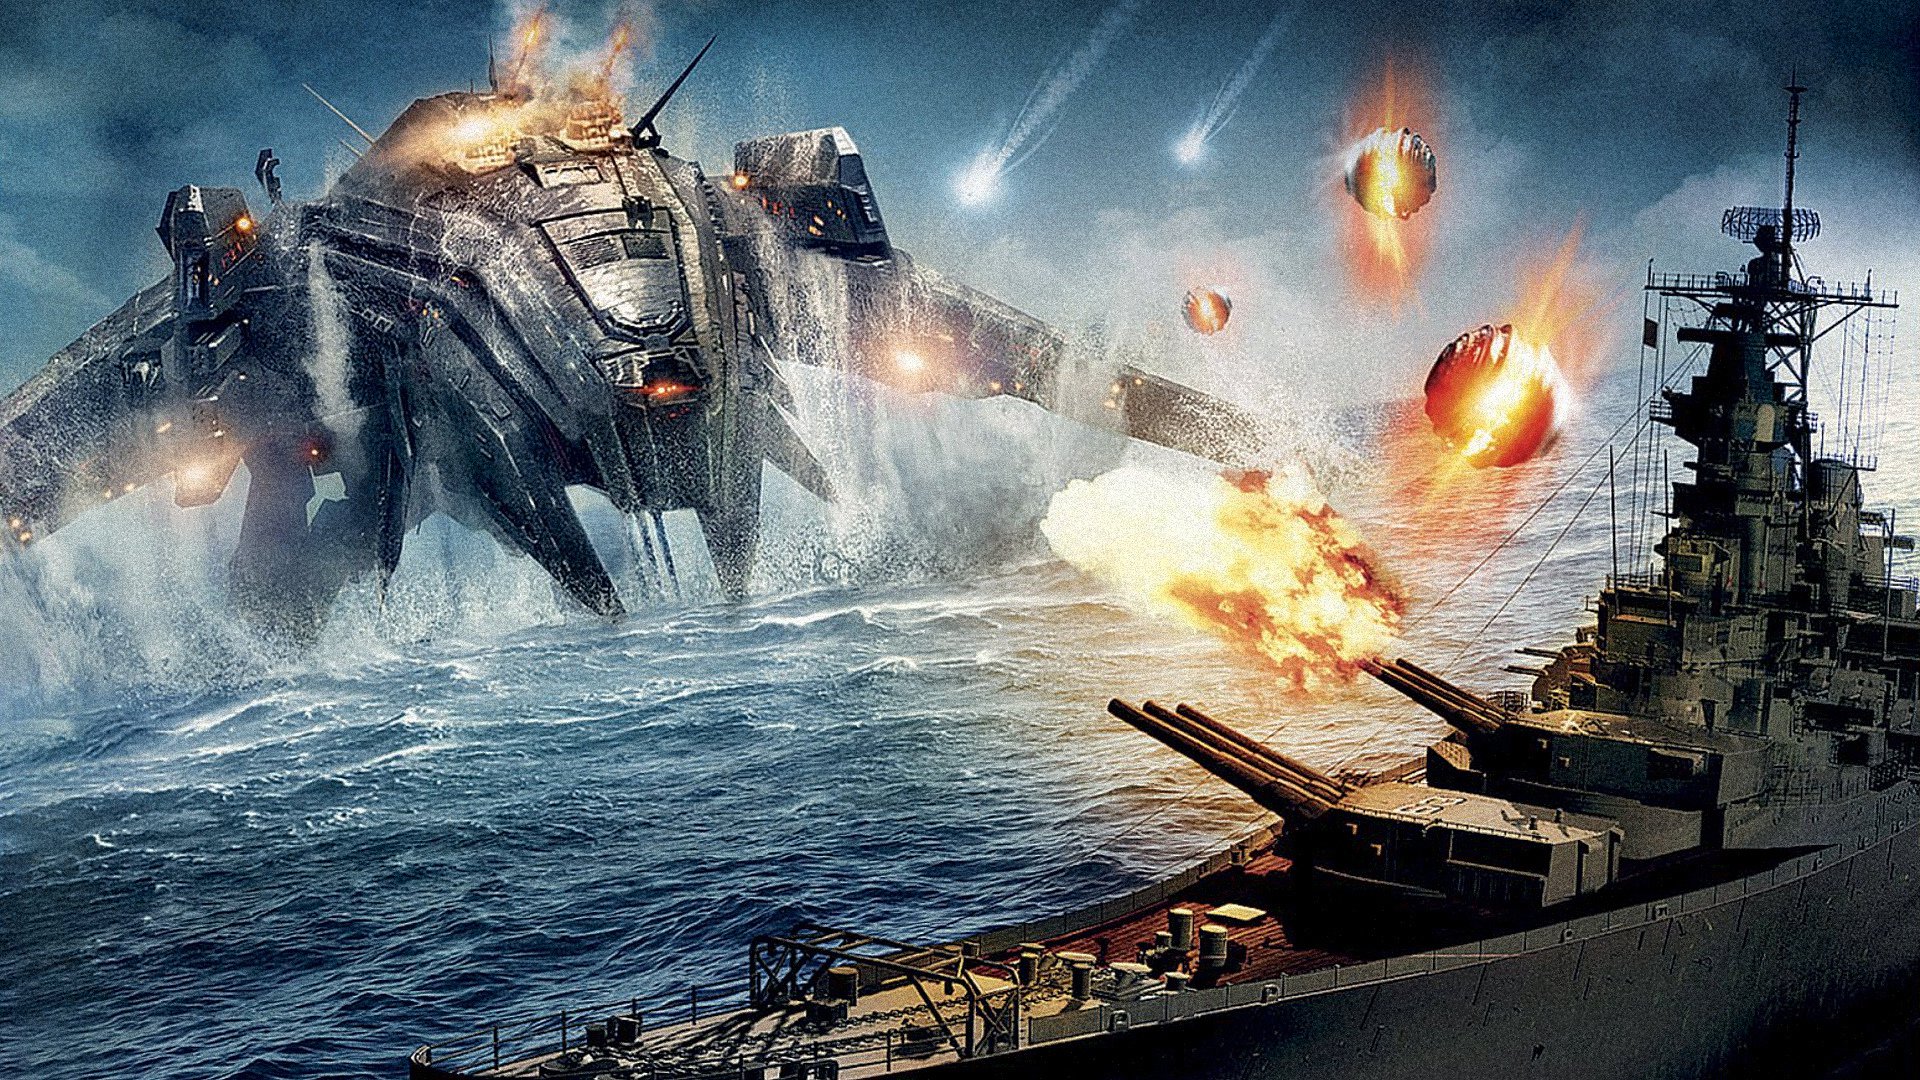 film wallpaper,action adventure game,strategy video game,warship,ship,naval ship